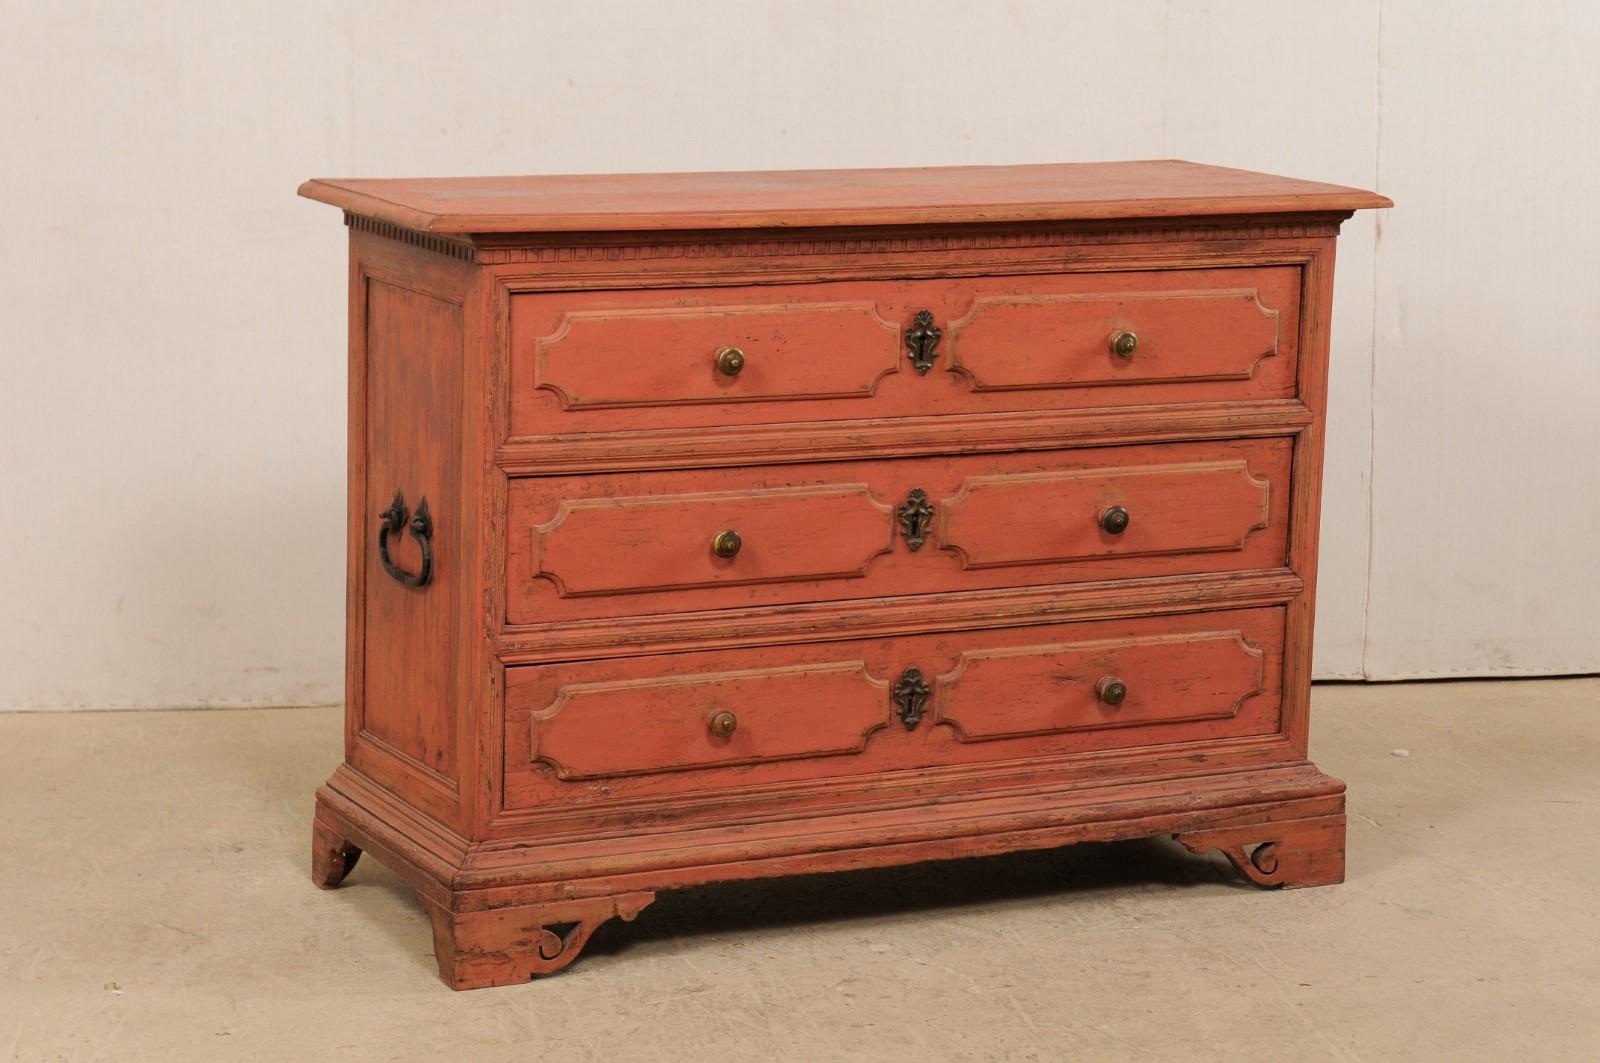 An Italian 19th century carved and painted wood chest of drawers with later additions. This antique commode from Italy features a rectangular-shaped top with dental carved accent trim beneath, a case which houses three full-sized and graduated